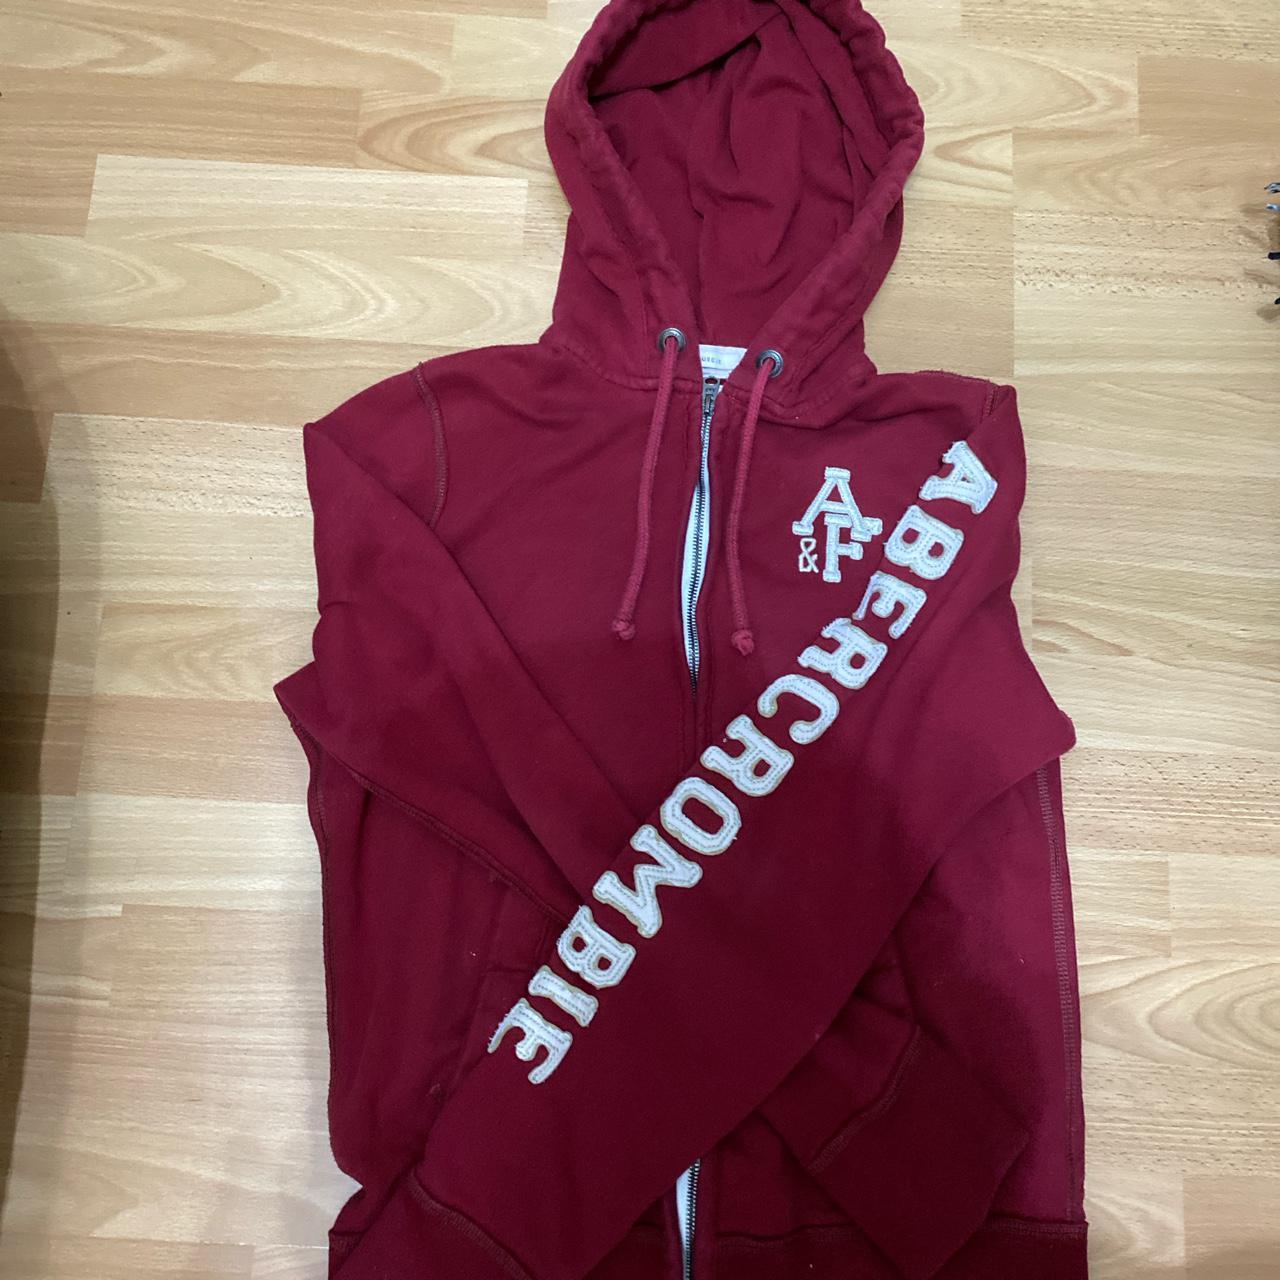 Abercrombie & Fitch Men's Burgundy and Red Hoodie | Depop